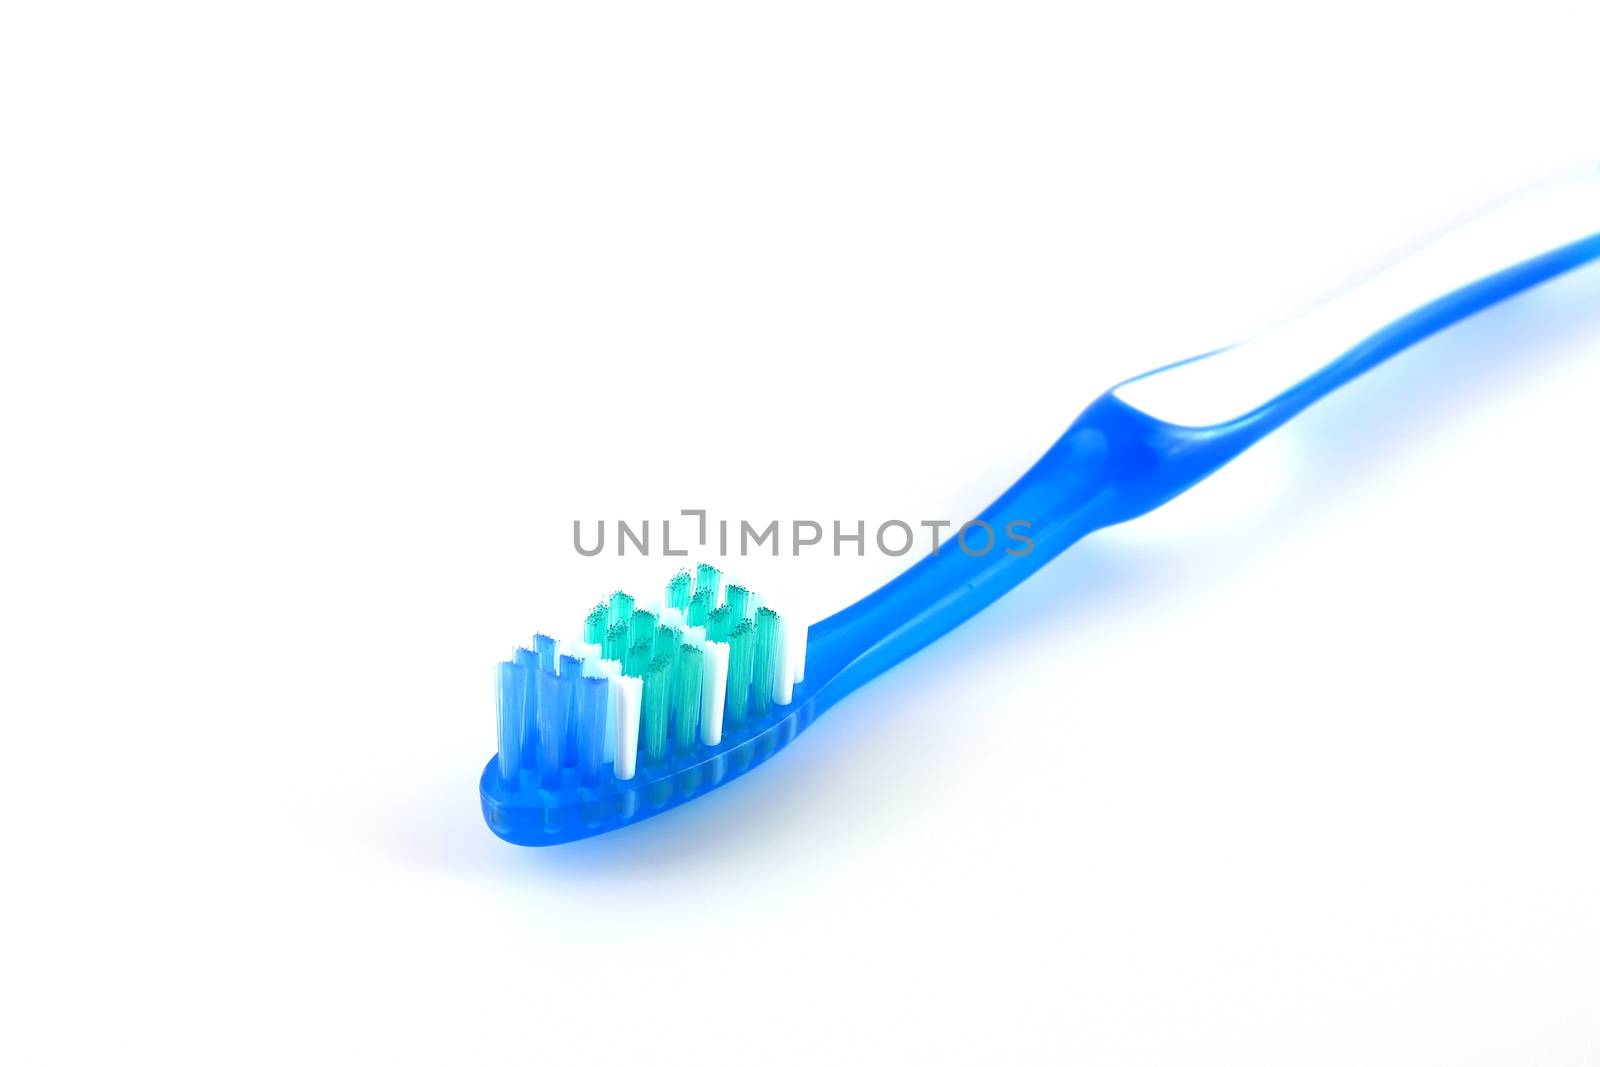 Tooth-brush over white